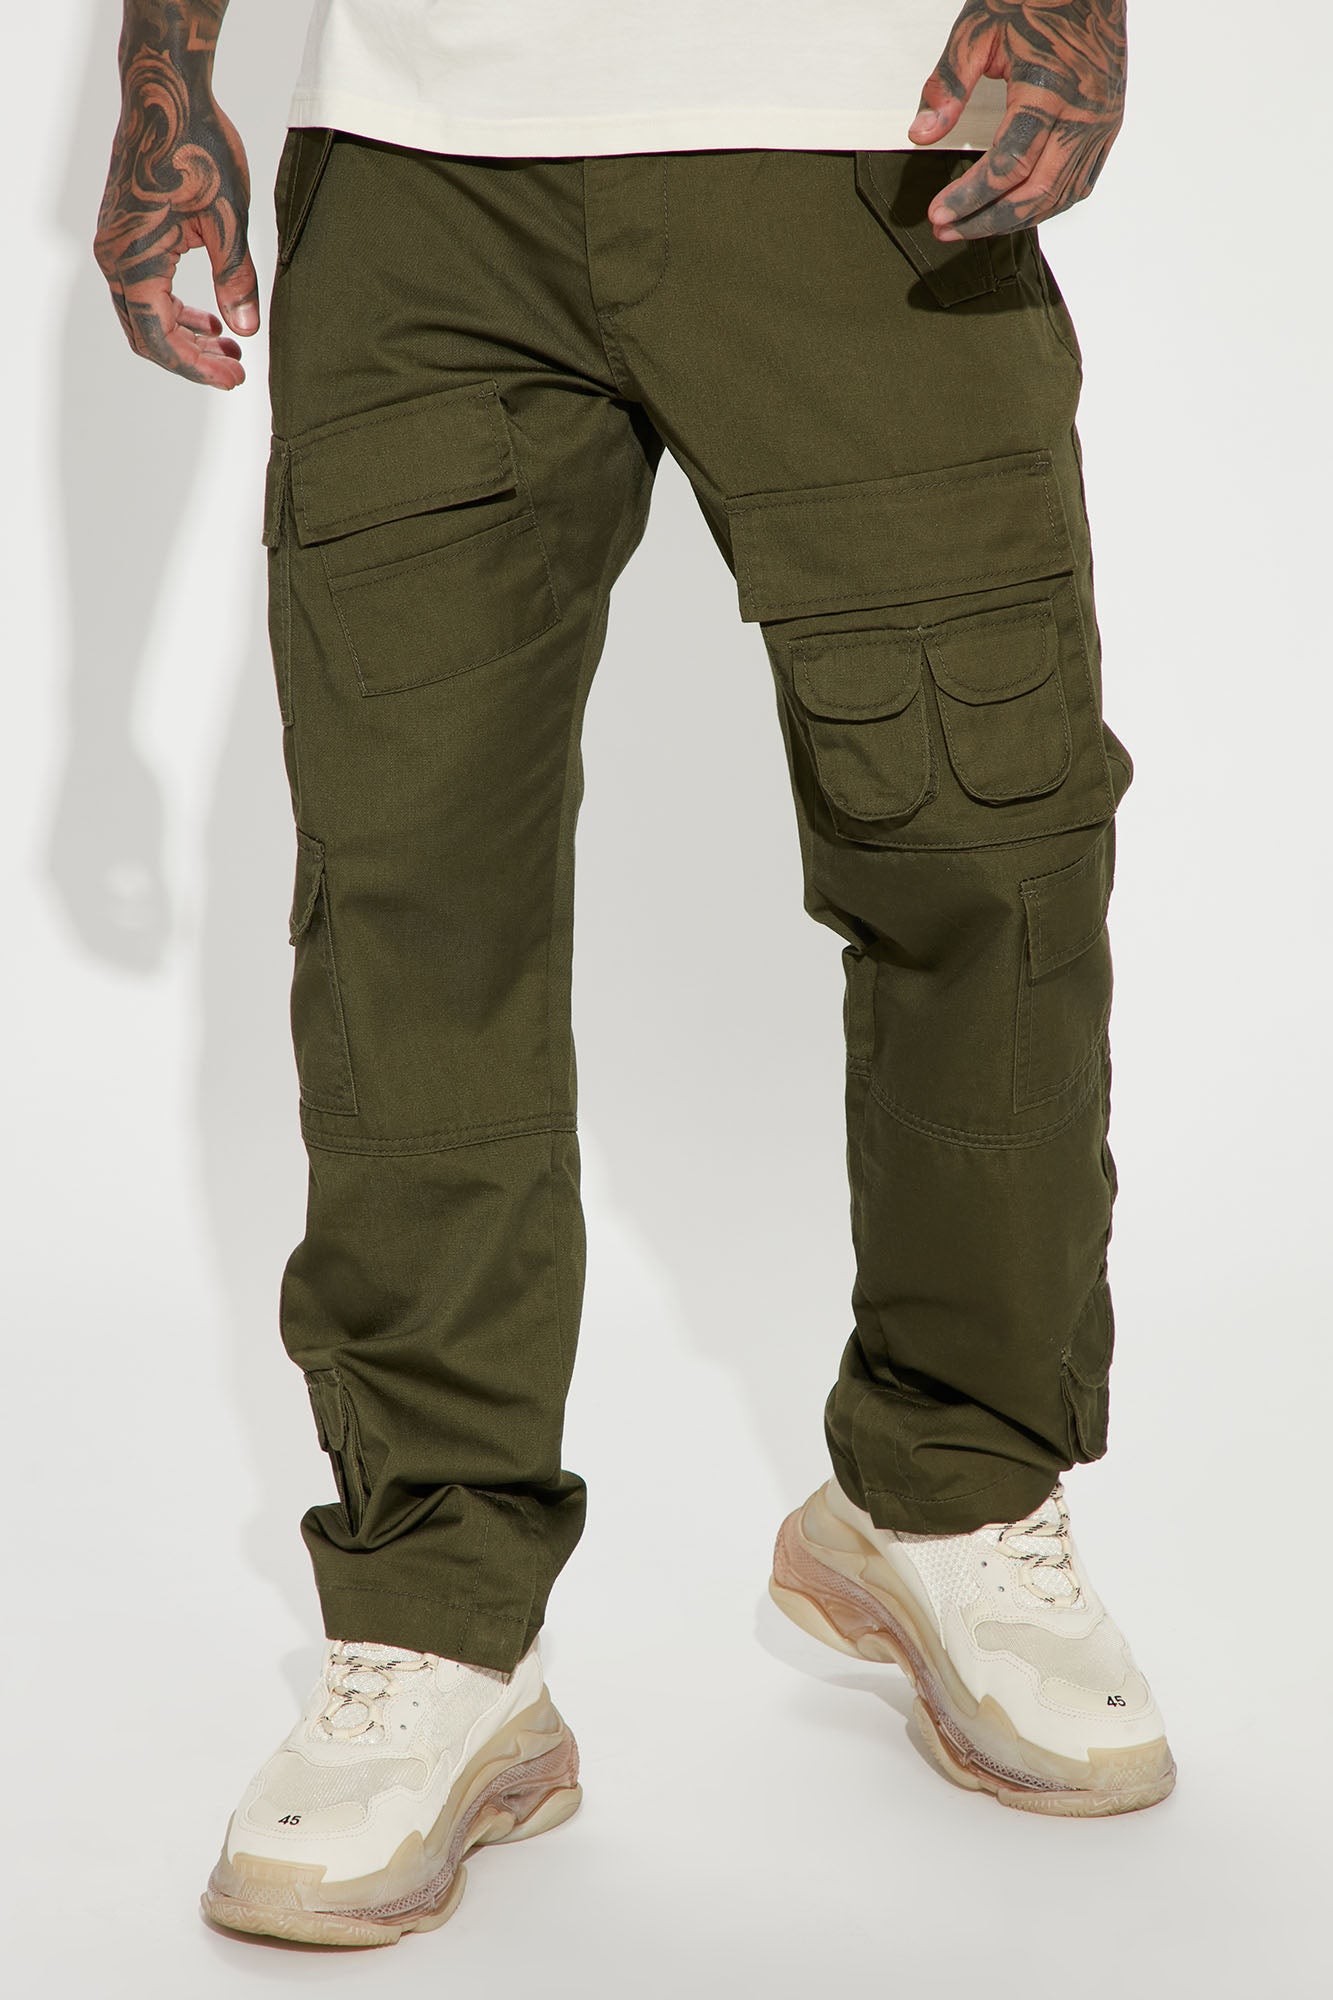 Corteiz Retro Printed Mens Modern Cargo Pants With Multi Pockets And High  Street Style From Taotao02, $19.51 | DHgate.Com